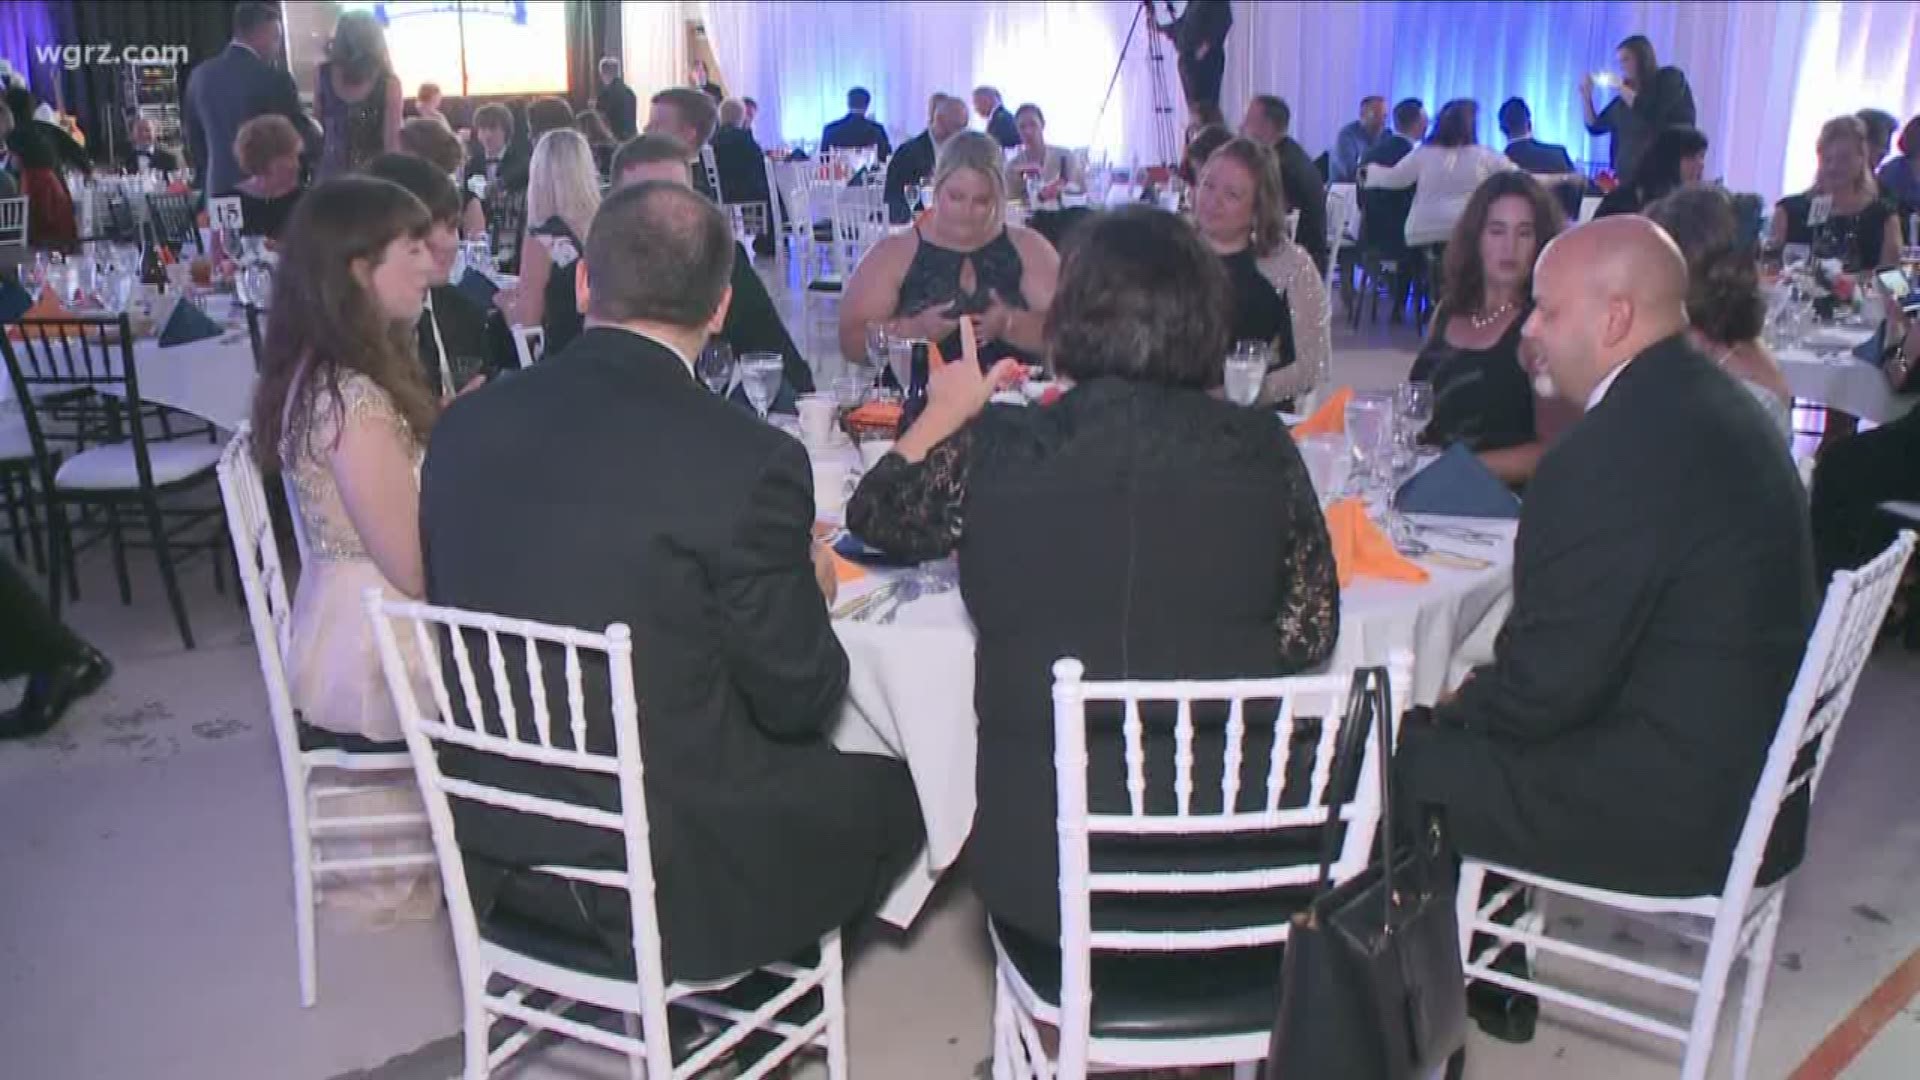 Mercy flight had their annual "beacon of hope" gala.
It celebrates patient success stories and raises money for Mercy Flight.